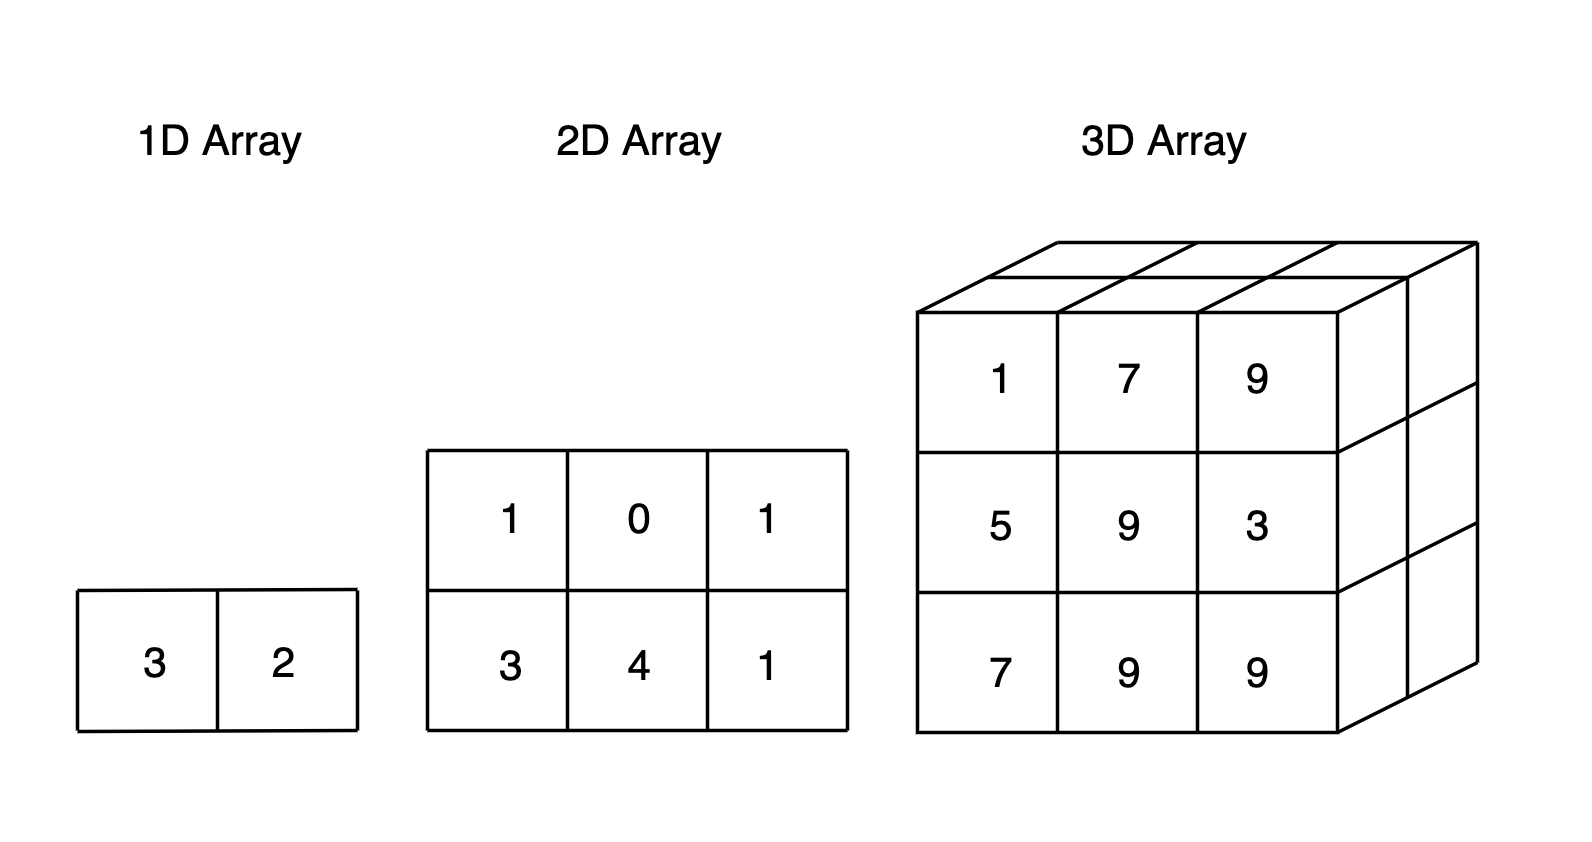 An illustration to understand concept of 3D array